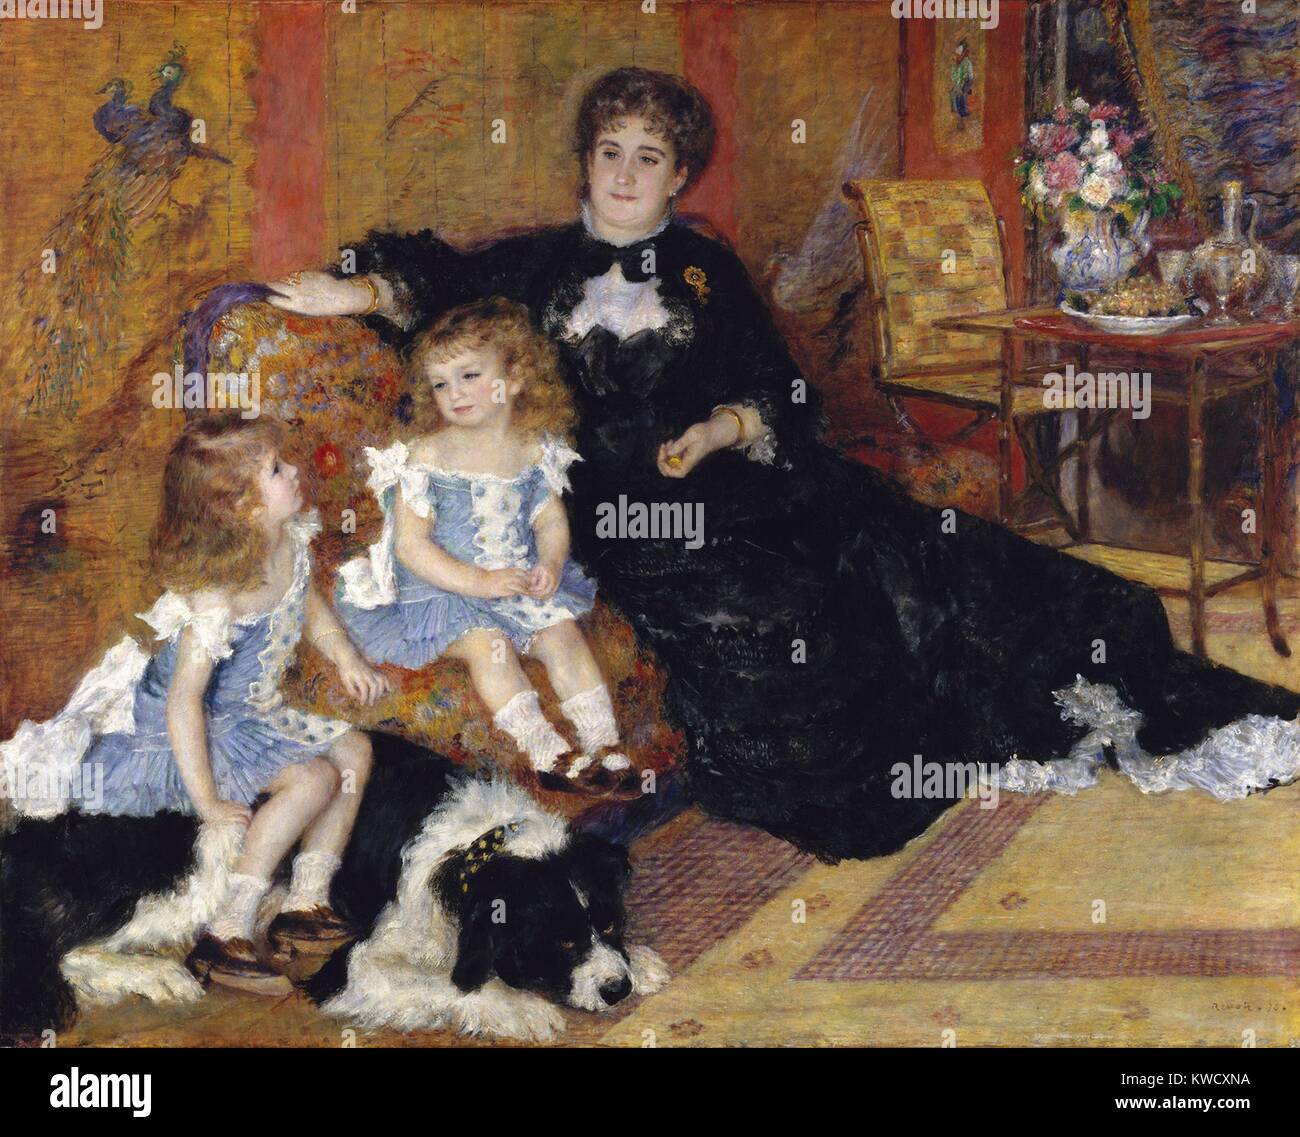 Mme. Georges Charpentier and her Children, by Auguste Renoir, 1878, impressionist oil painting. This commissioned portrait of the influential wife of publisher Georges Charpentier is one of Renoirs masterpieces (BSLOC 2017 3 73) Stock Photo